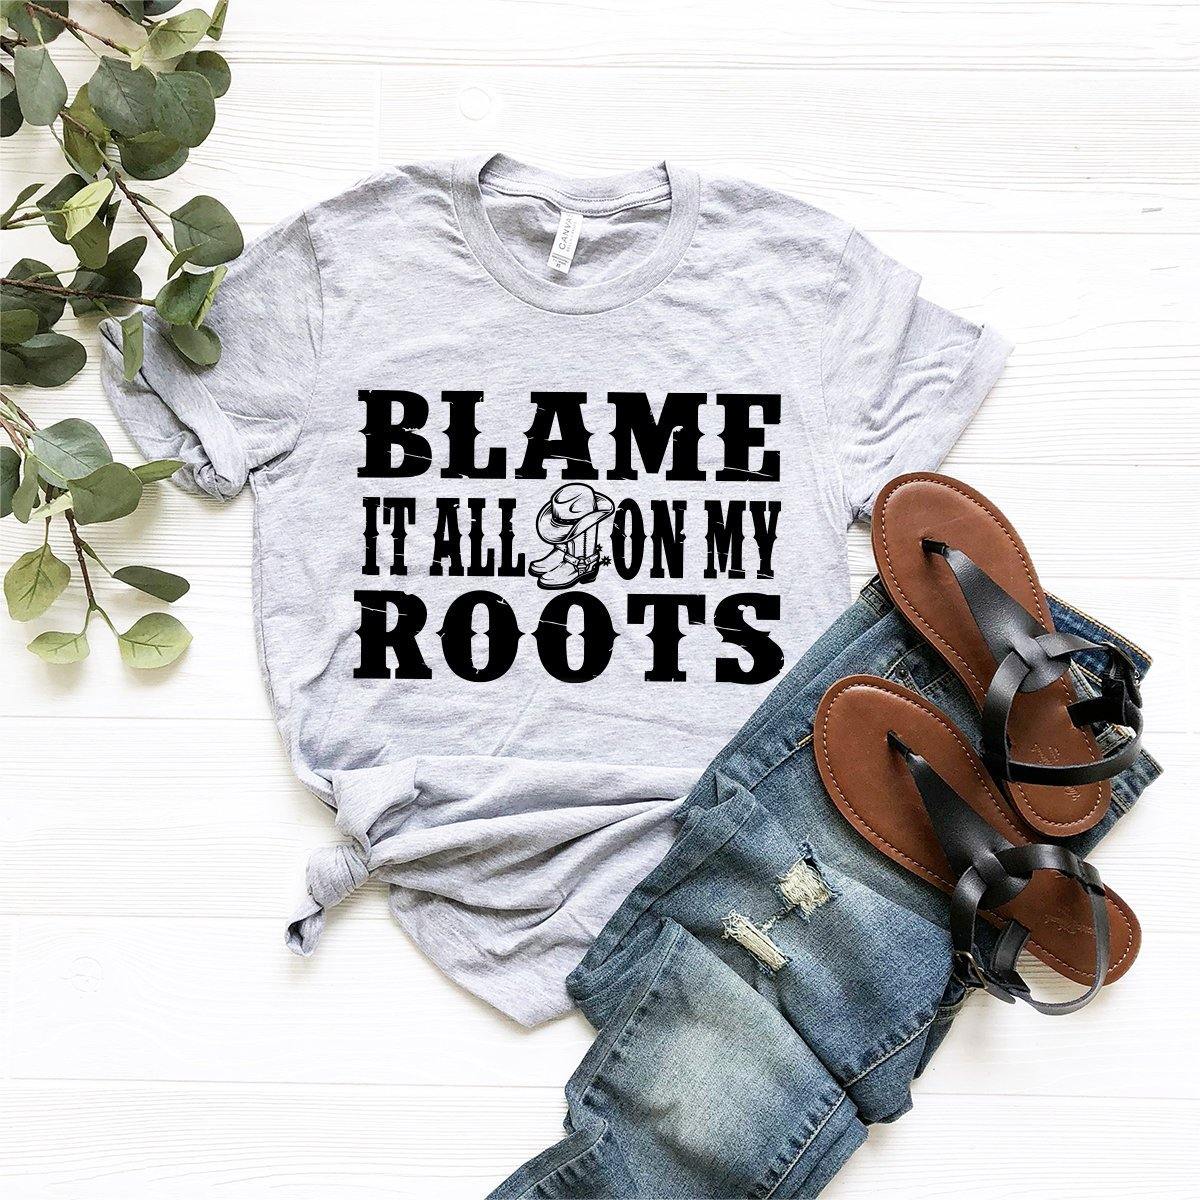 Country Song Shirt, Country Music Shirt, Blame It All On My Roots Shirt, Western Life Shirt, Country Tshirt, Cowgirl Shirt, Garth Brooks Fan - Fastdeliverytees.com